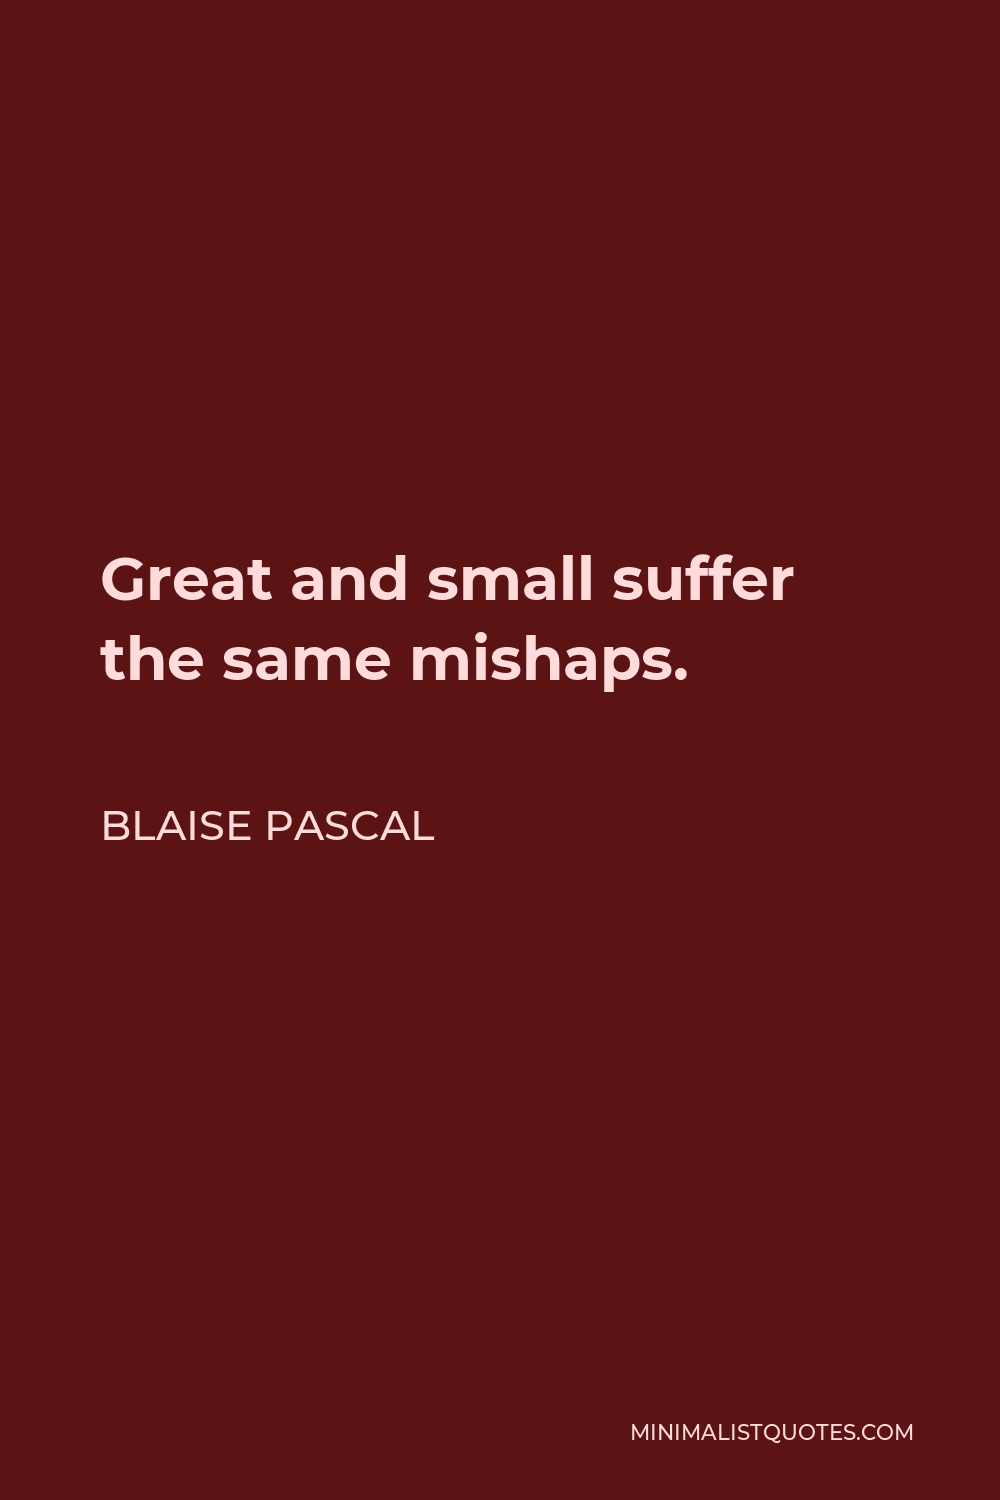 Blaise Pascal Quote - Great and small suffer the same mishaps.